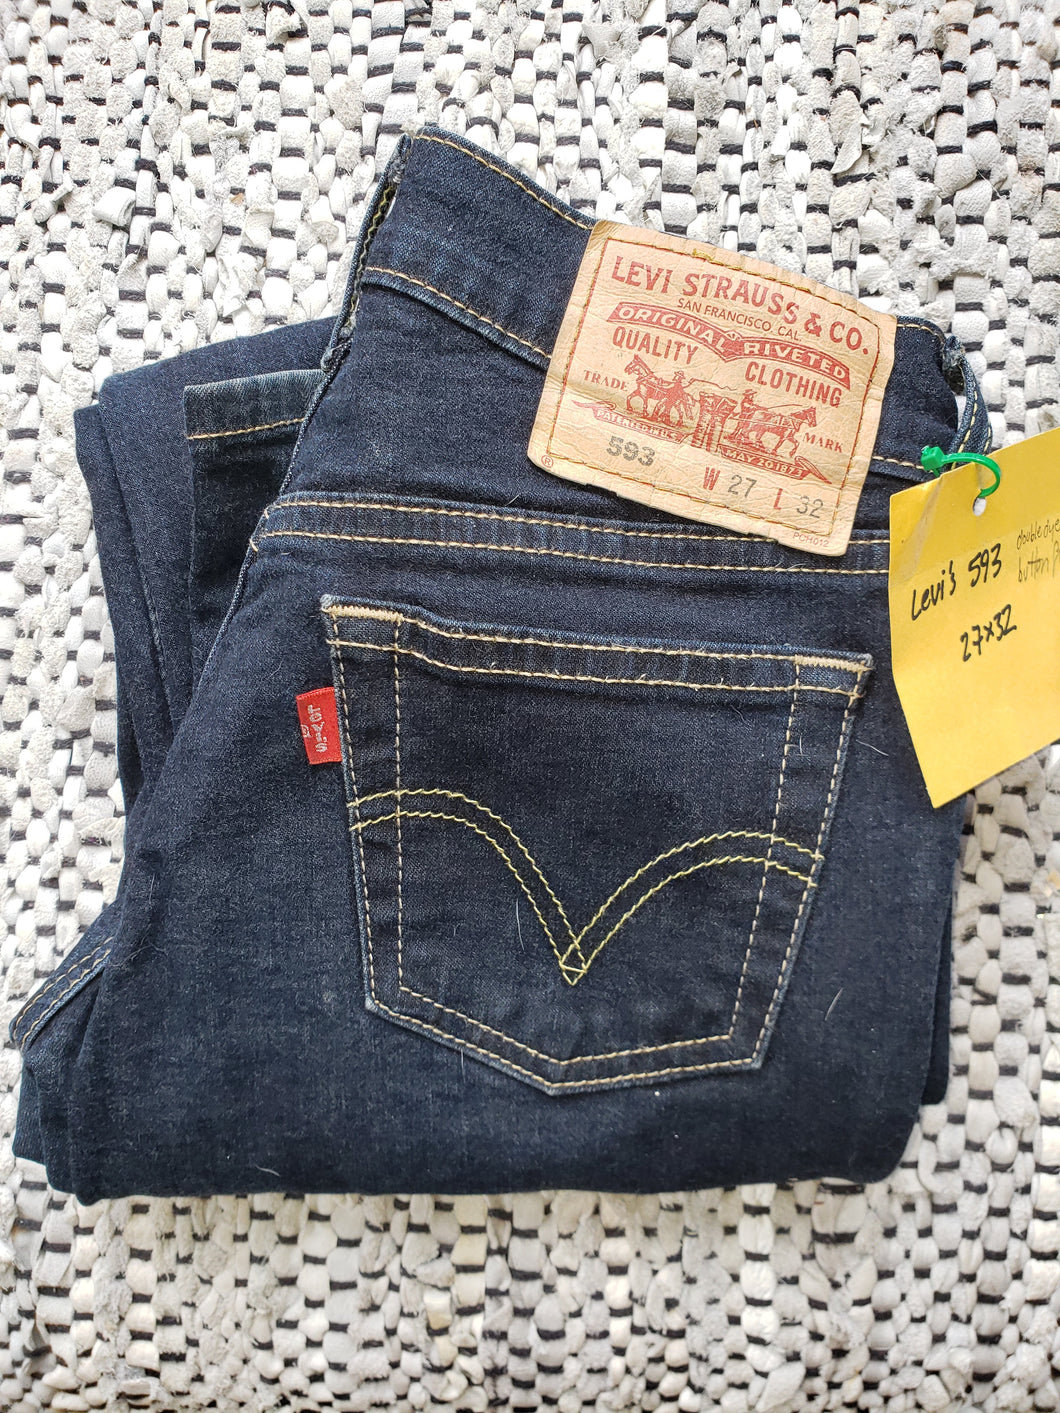 Kingspier Vintage - Levi's  593  27x32 (measures 28x31.5), button fly, deep blue double rinse, 28 x 31 1/2, ride 6.5, cuff width 8.75, Made in Vietnam, 99% cotton, 1% Elastane, Excellent condition